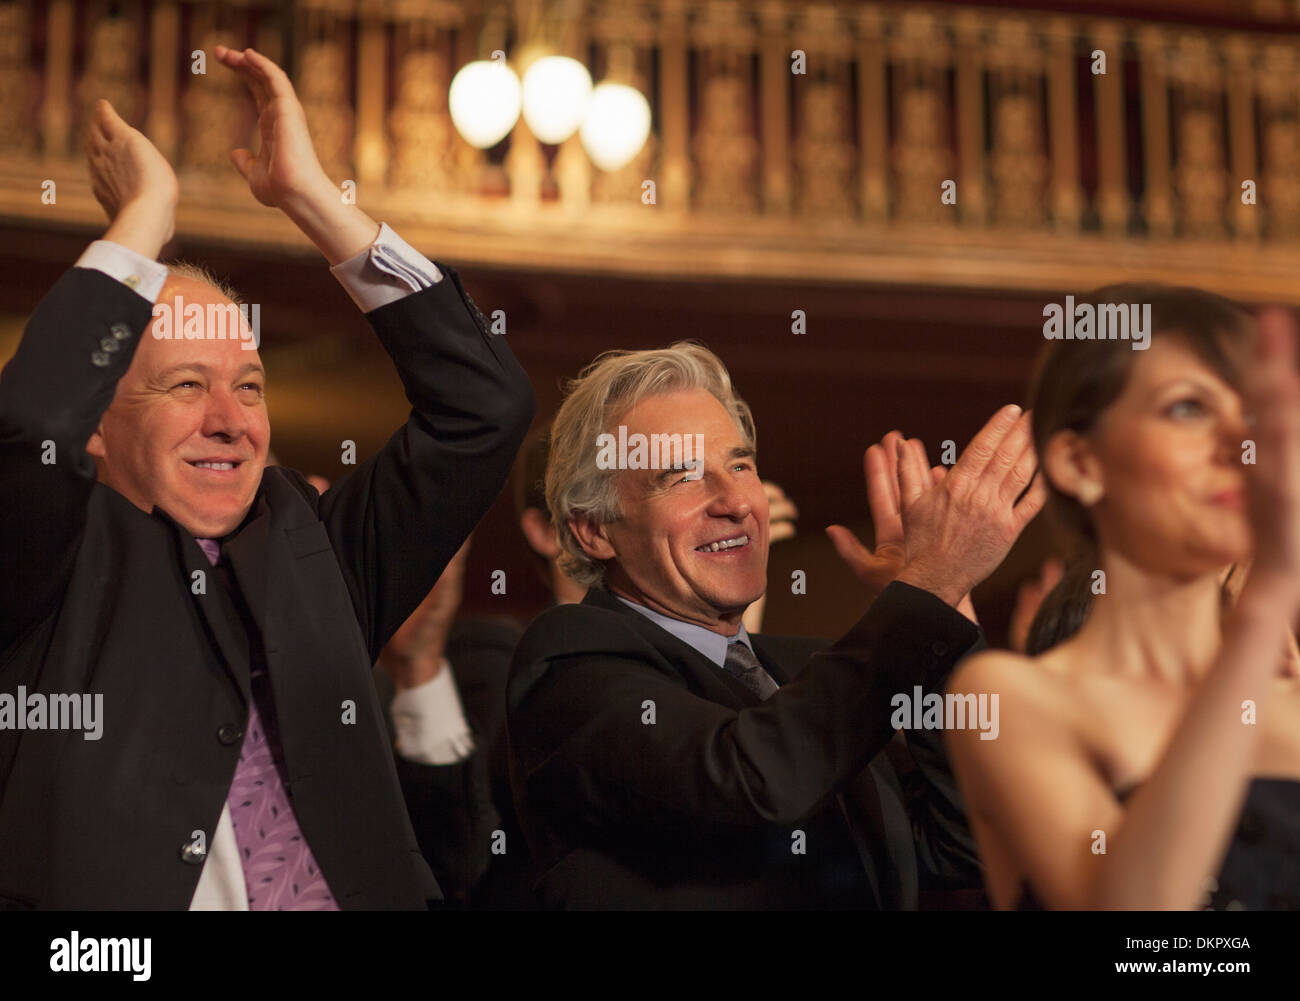 Enthusiastic men clapping in theater audience Stock Photo